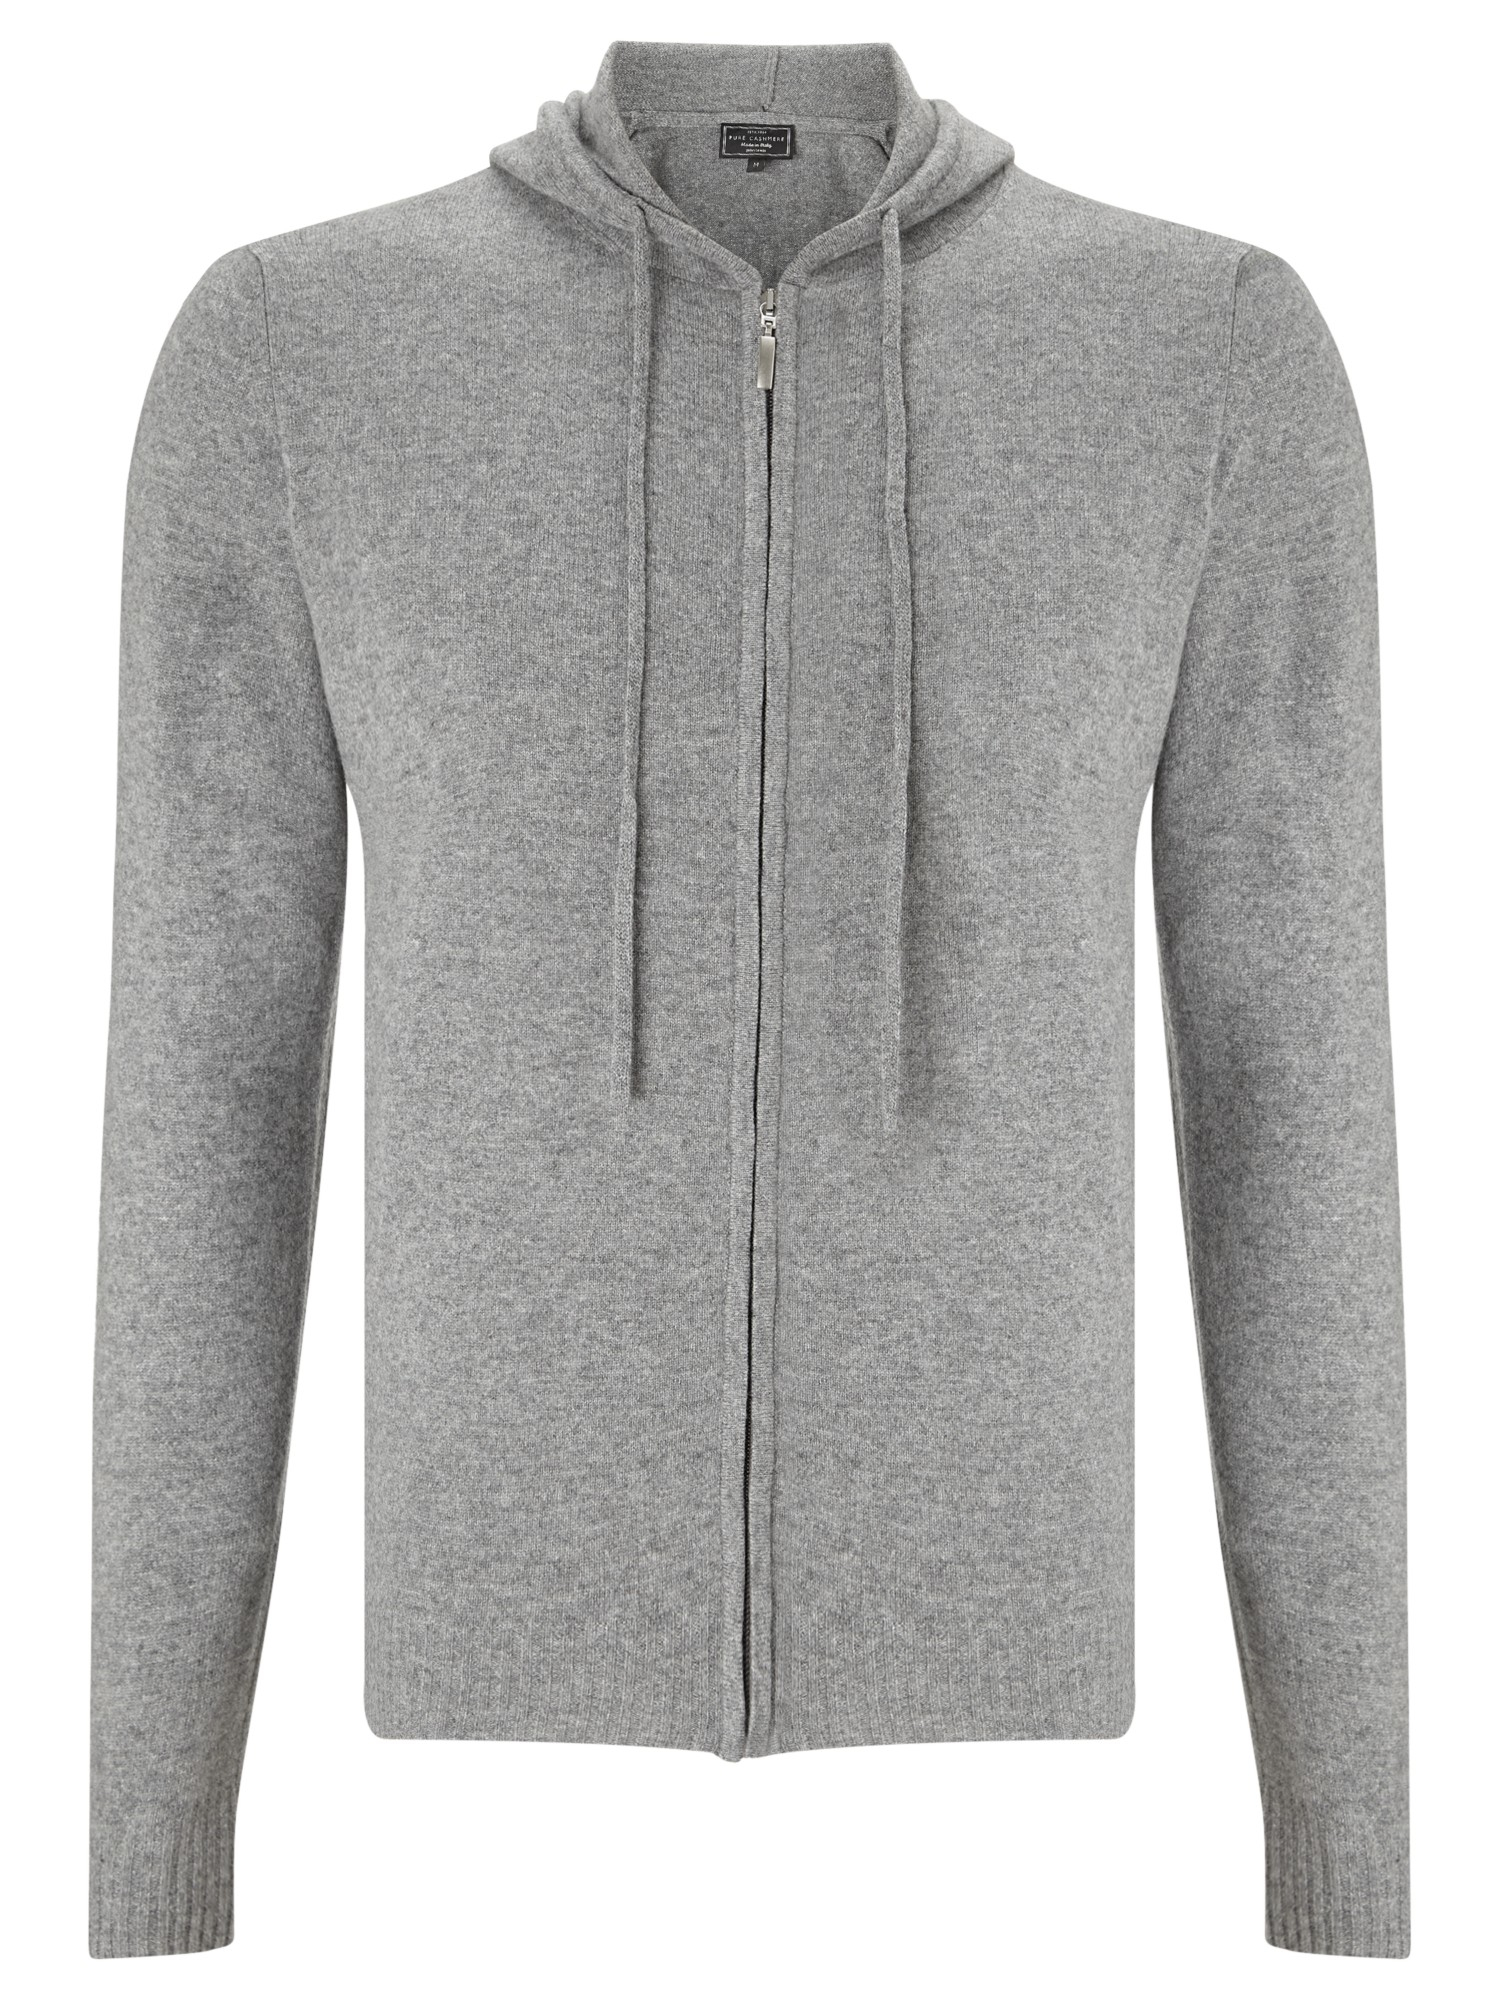 John lewis Made In Italy Cashmere Full Zip Hoodie in Gray for Men (Grey ...